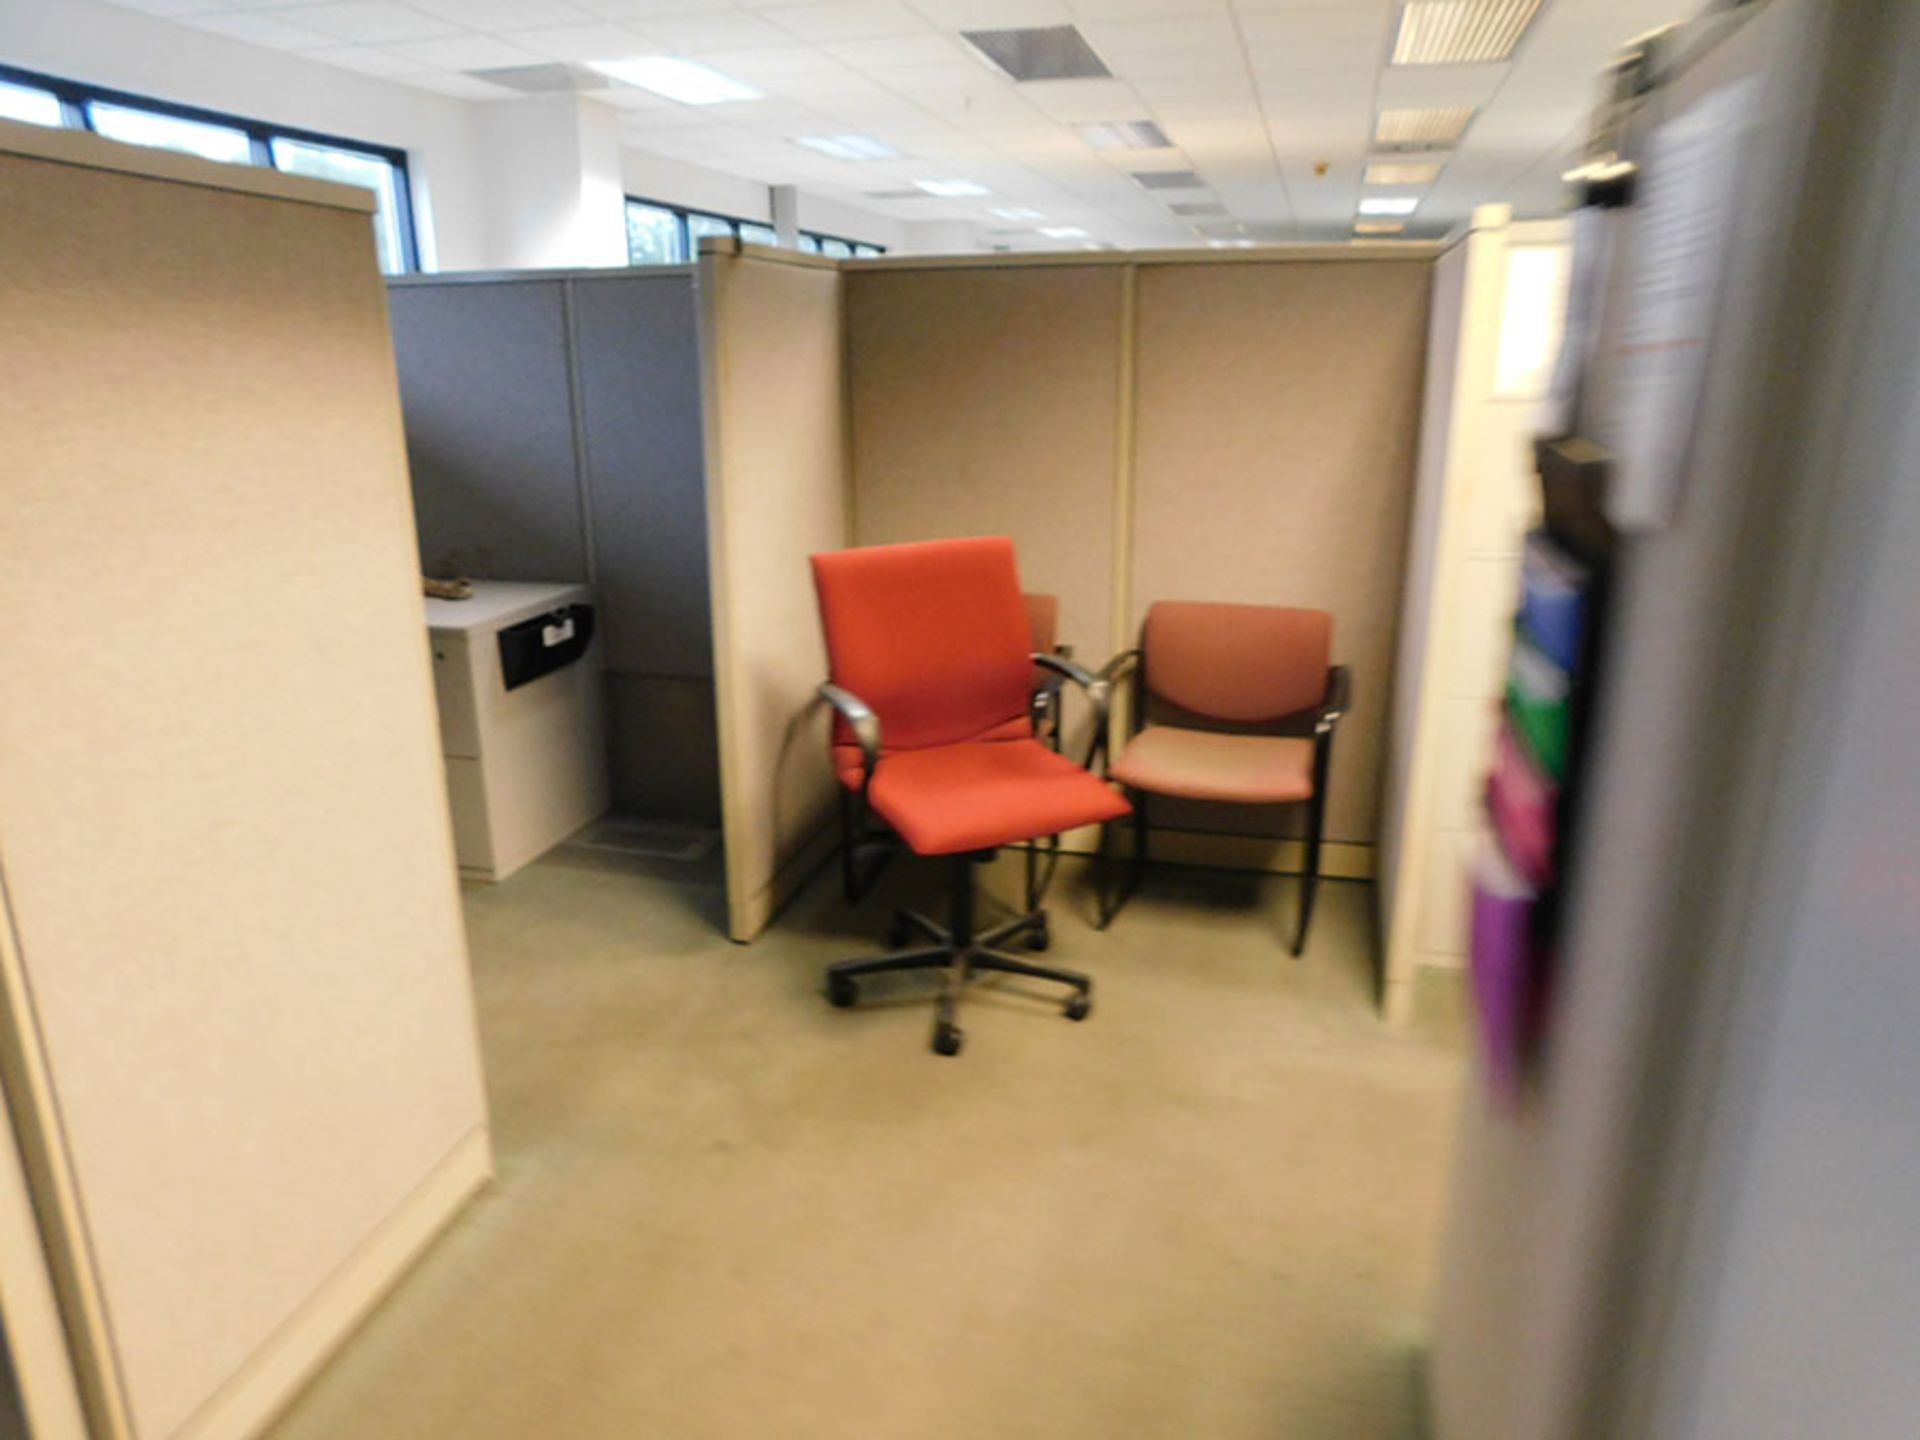 FIRST CUBICAL & SURROUNDING CABINETS - Image 2 of 5